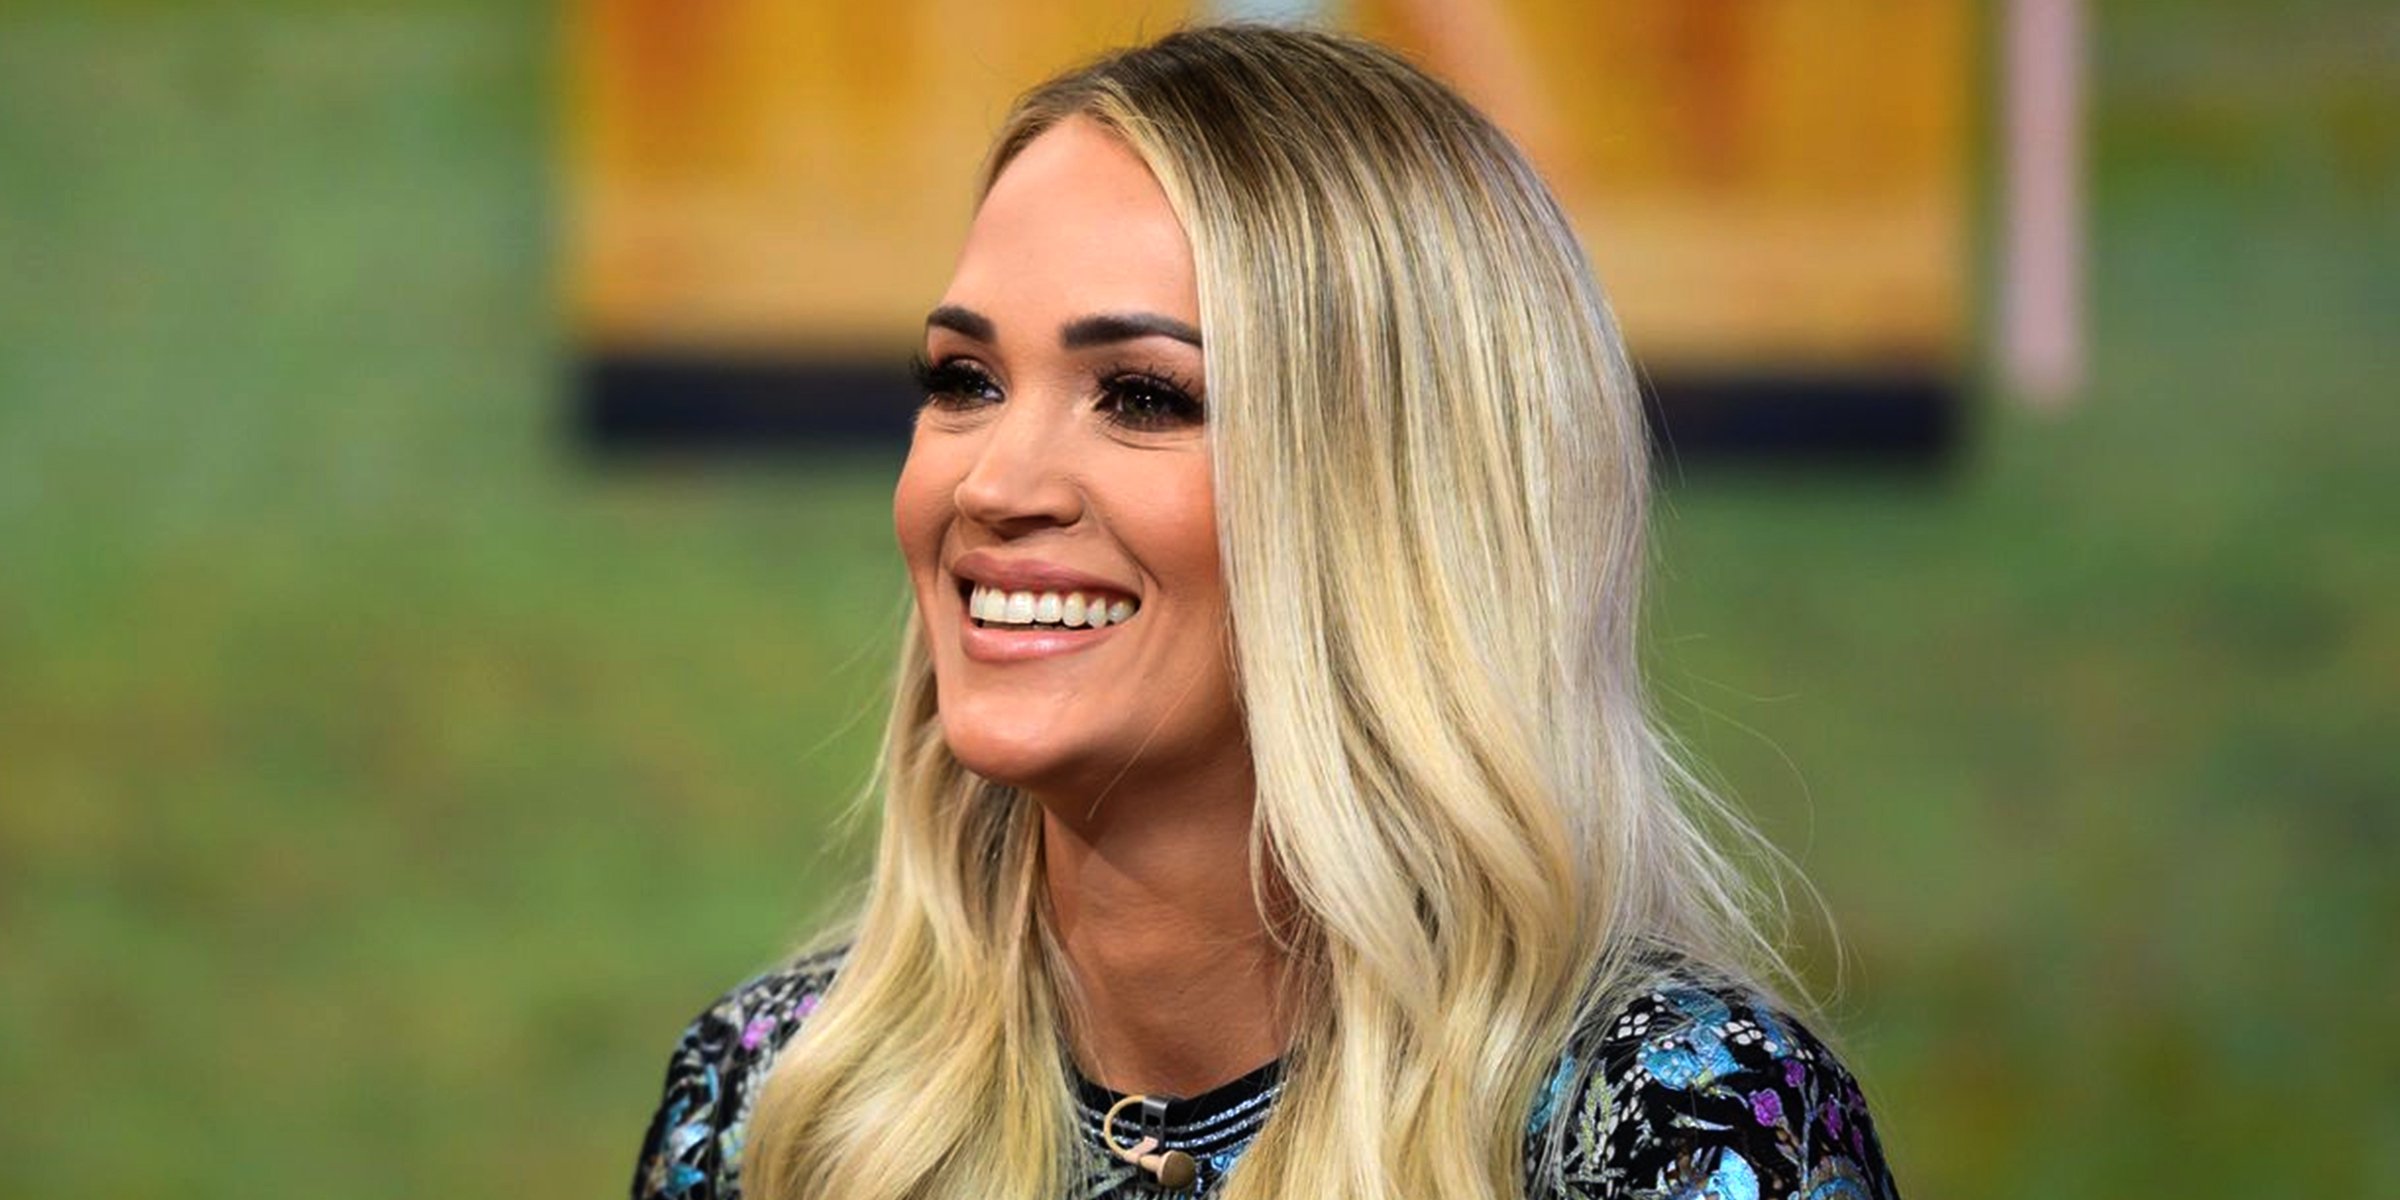 Carrie Underwood | Source: Getty Images